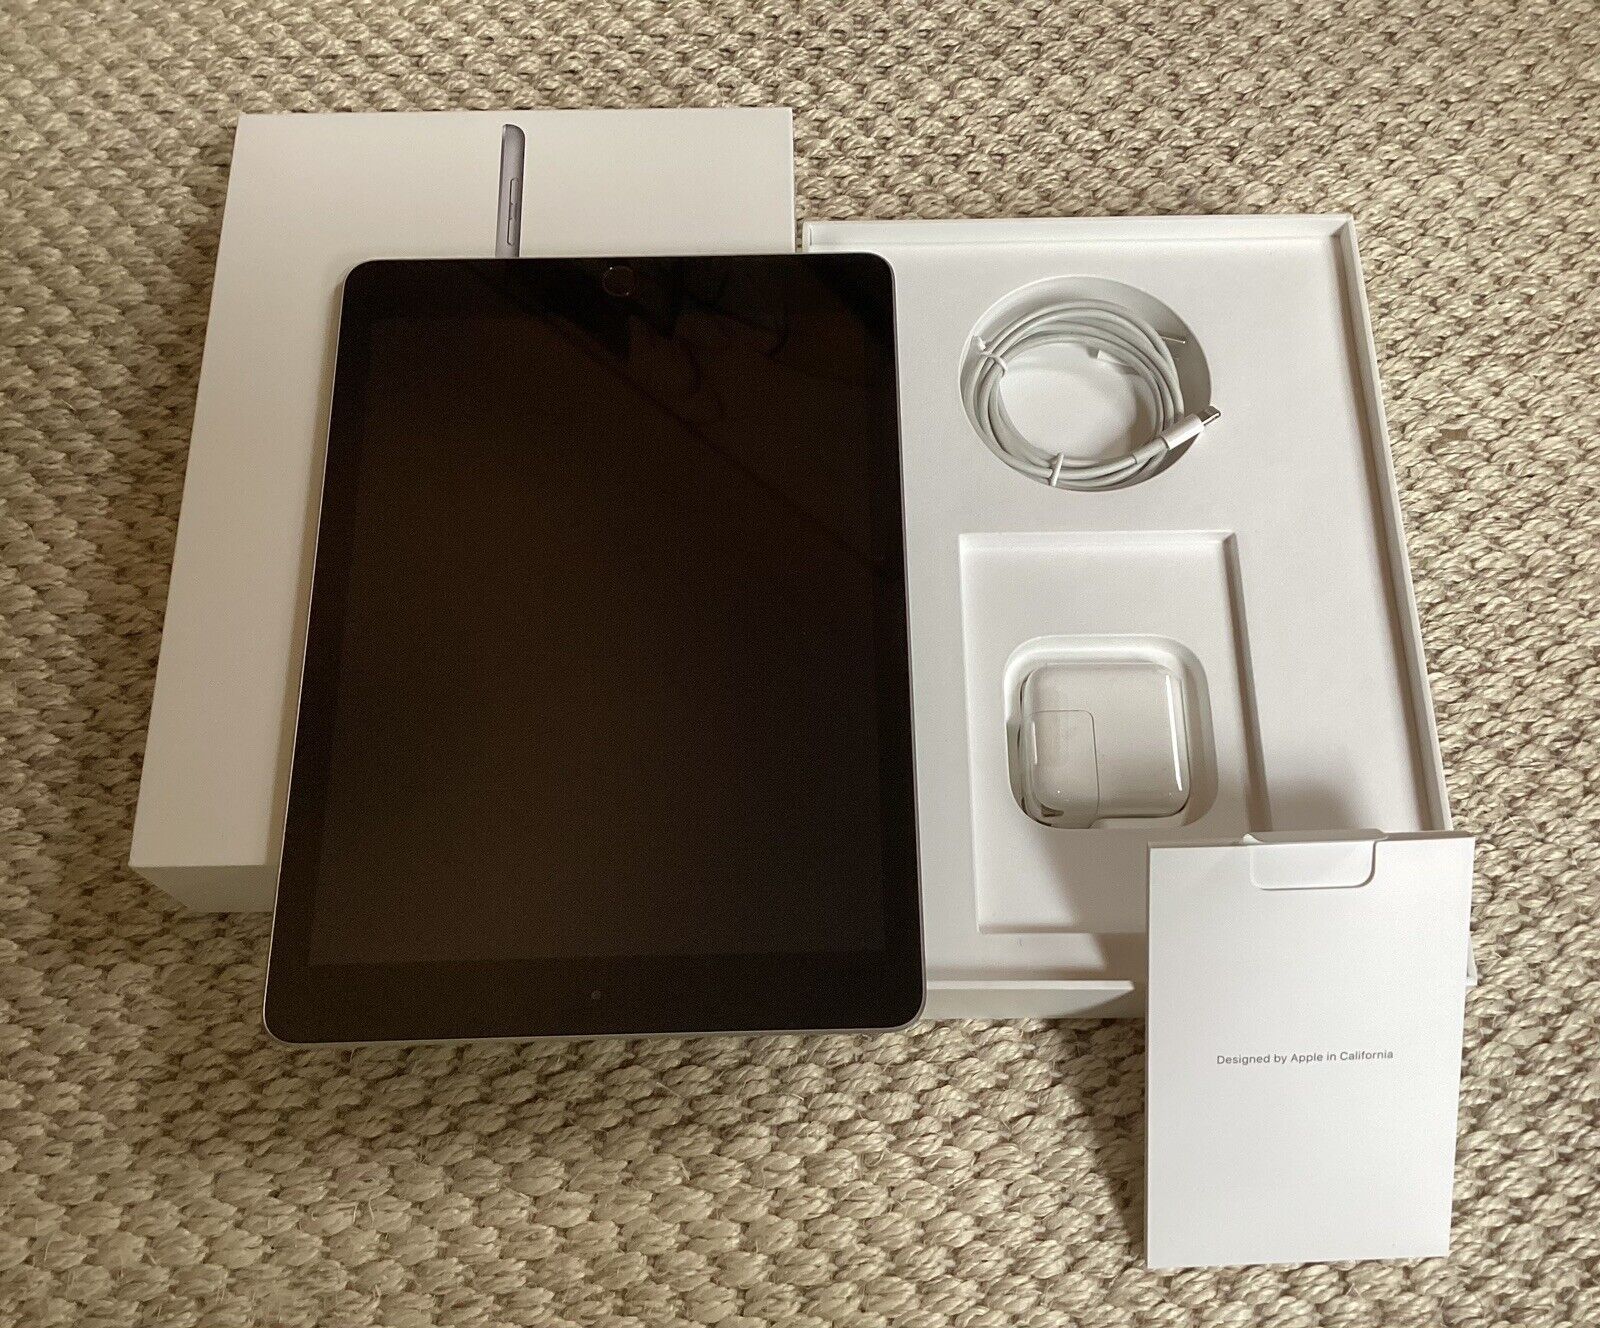 Apple iPad: In Original Box, Works Perfectly, Looks New, Bundled With Free Case